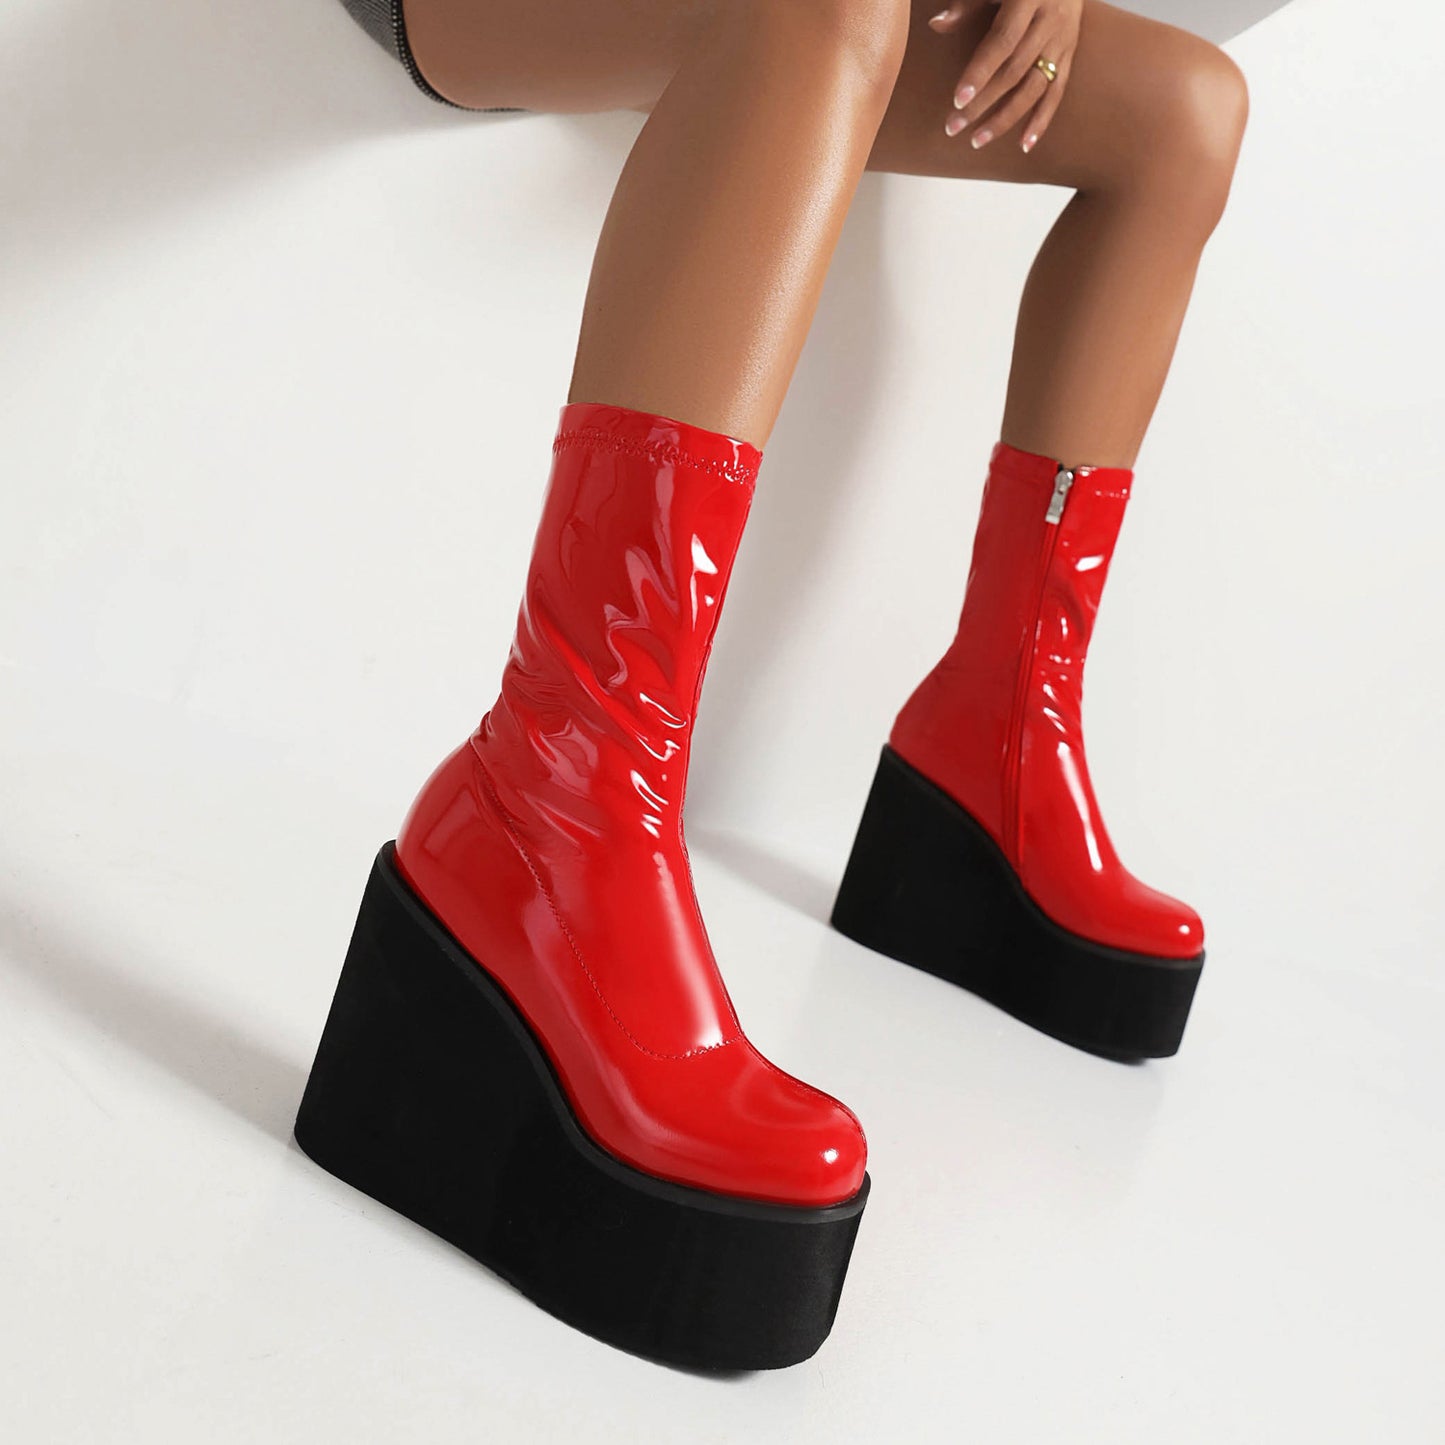 Glossy Round Toe Side Zippers Lace Up Wedge Heel Platform Mid-Calf Boots for Women